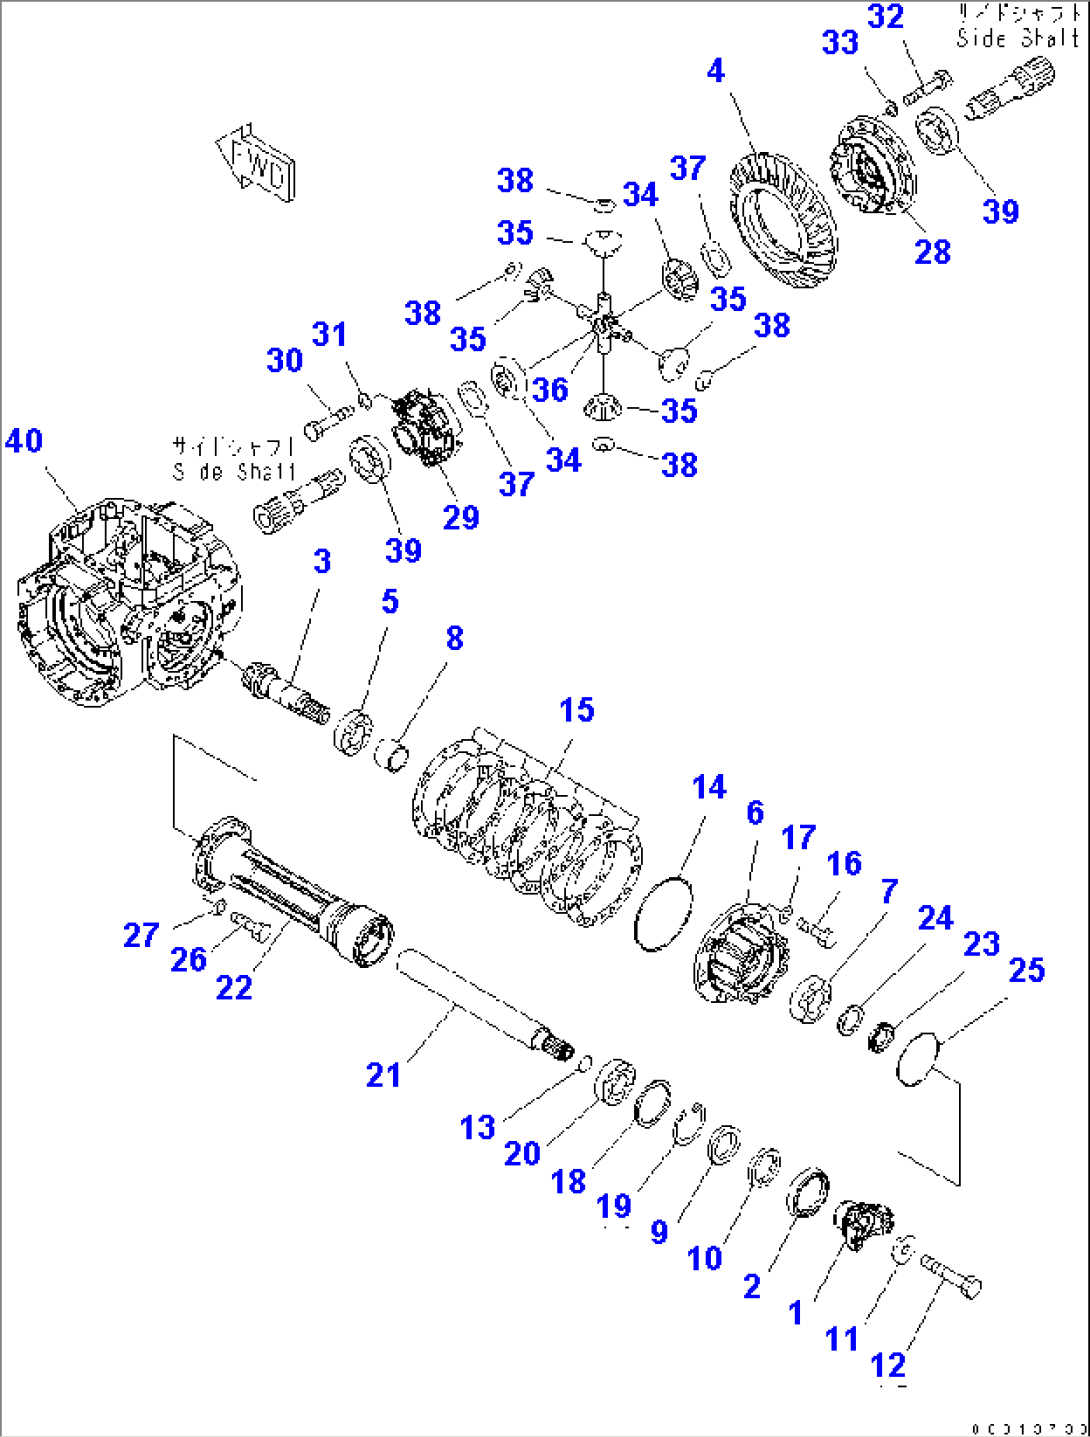 FRONT AXLE (DIFFERENTIAL)